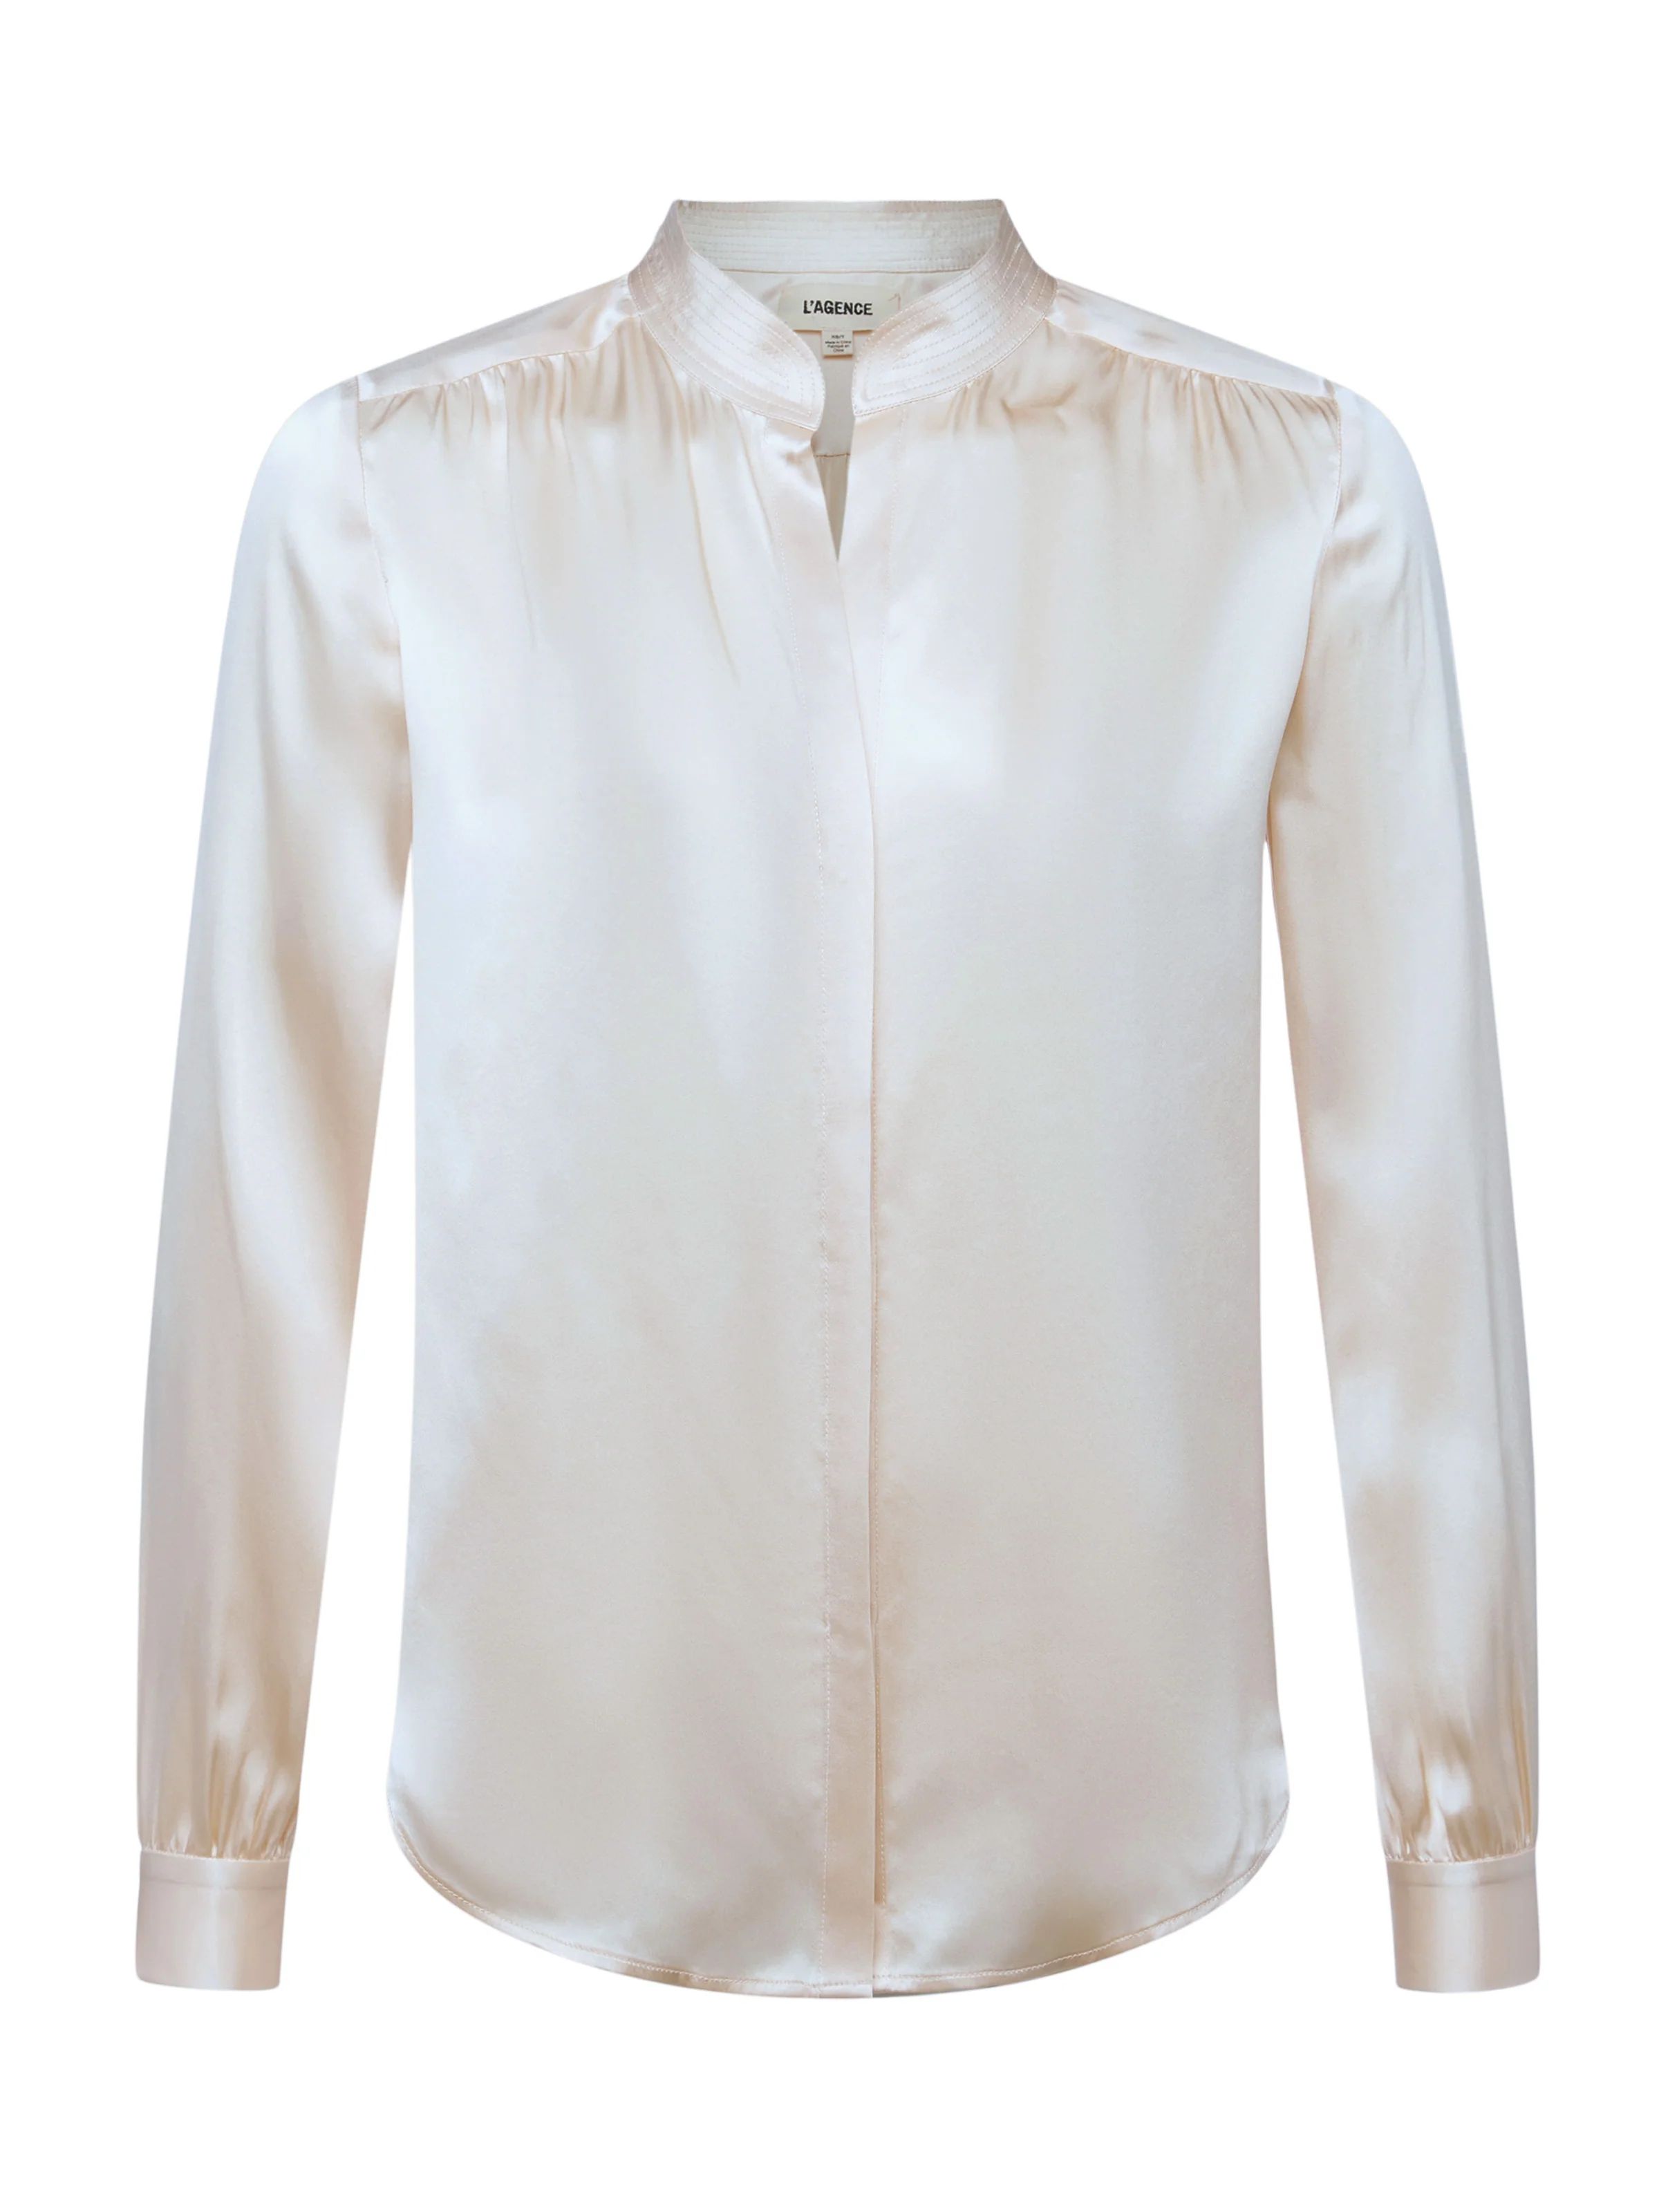 L'AGENCE Bianca Blouse in Pearl | L'Agence